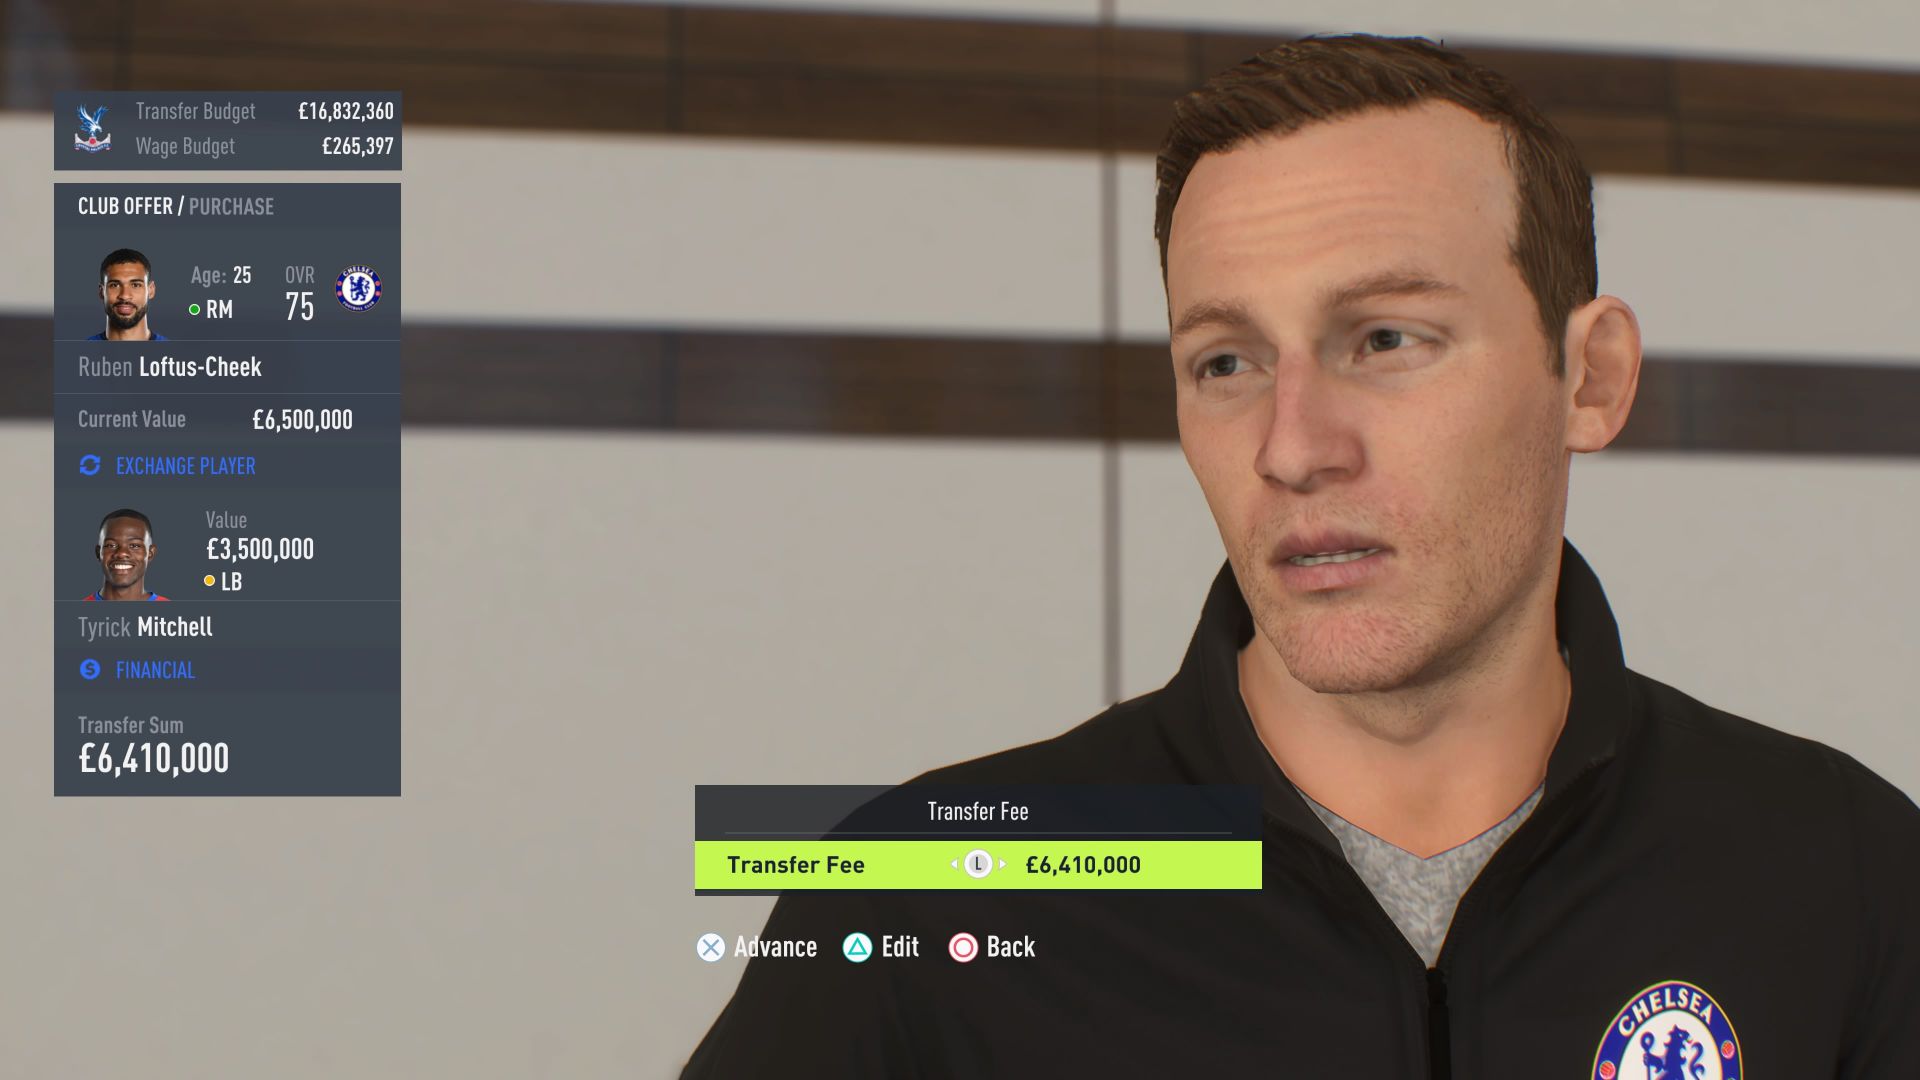 FIFA 22 Career Mode guide to scouting the best players and mastering transfers